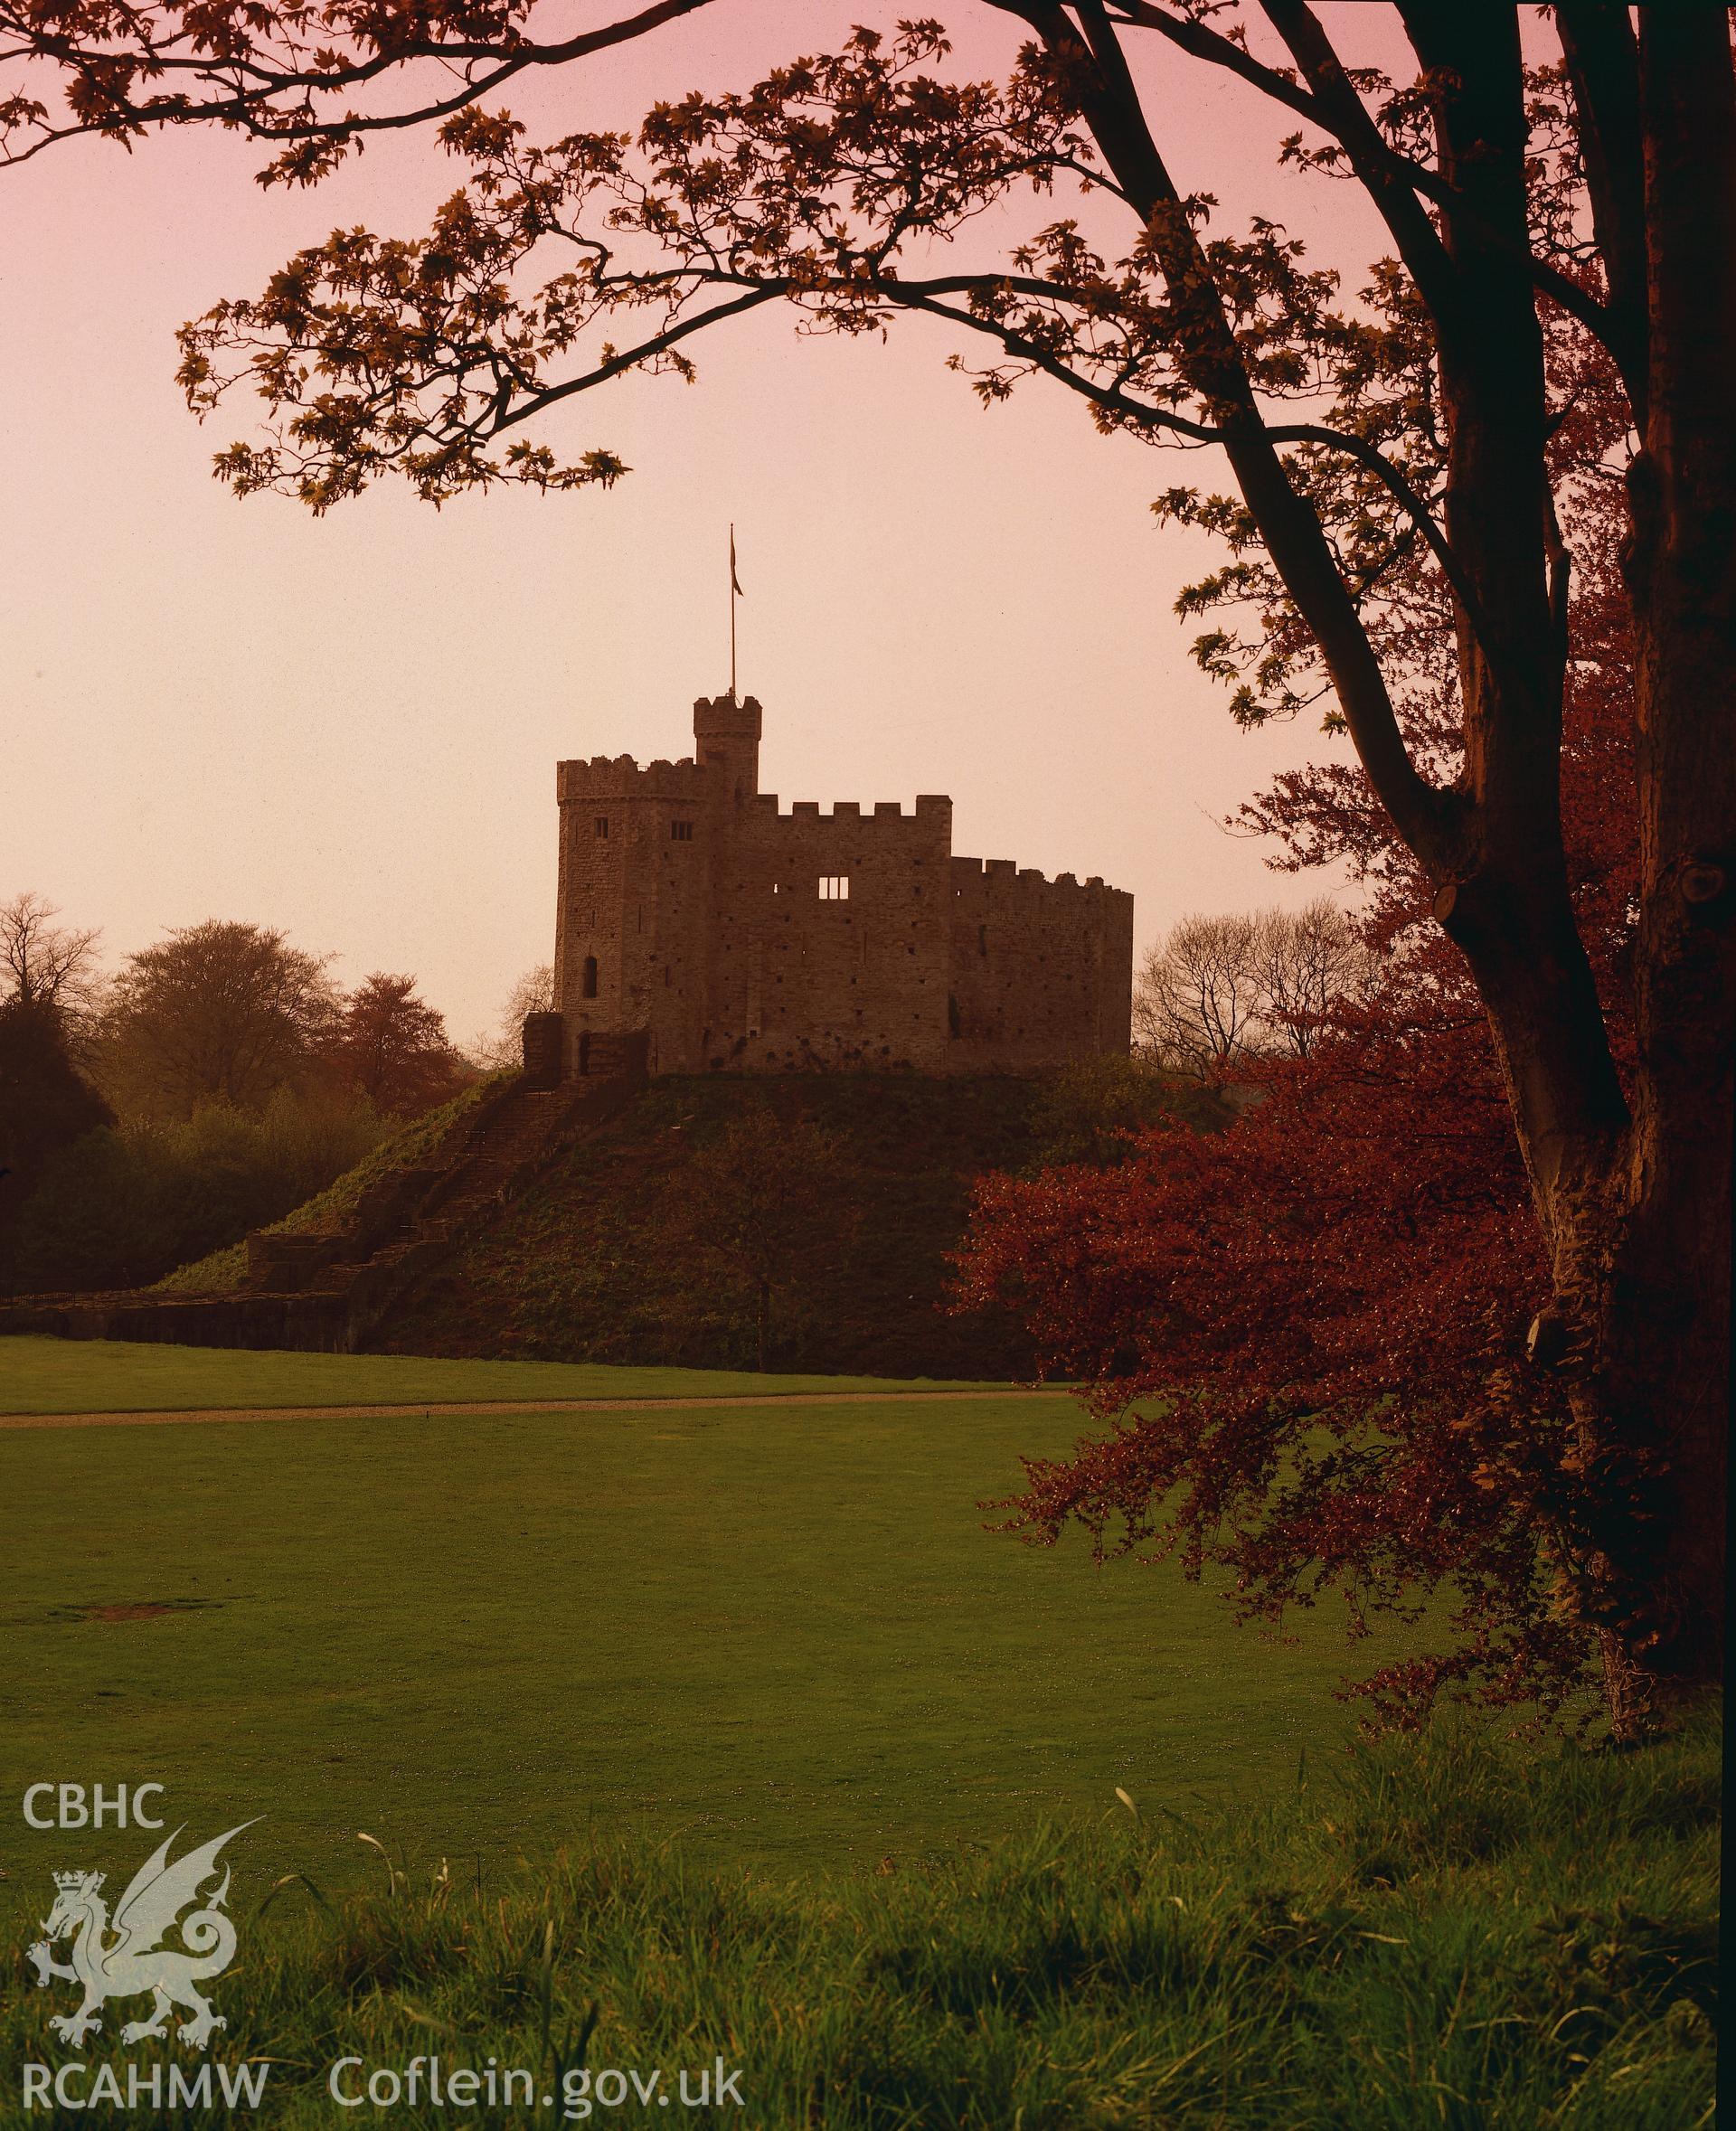 RCAHMW colour transparency of a general exterior view of Cardiff Castle at sunset.